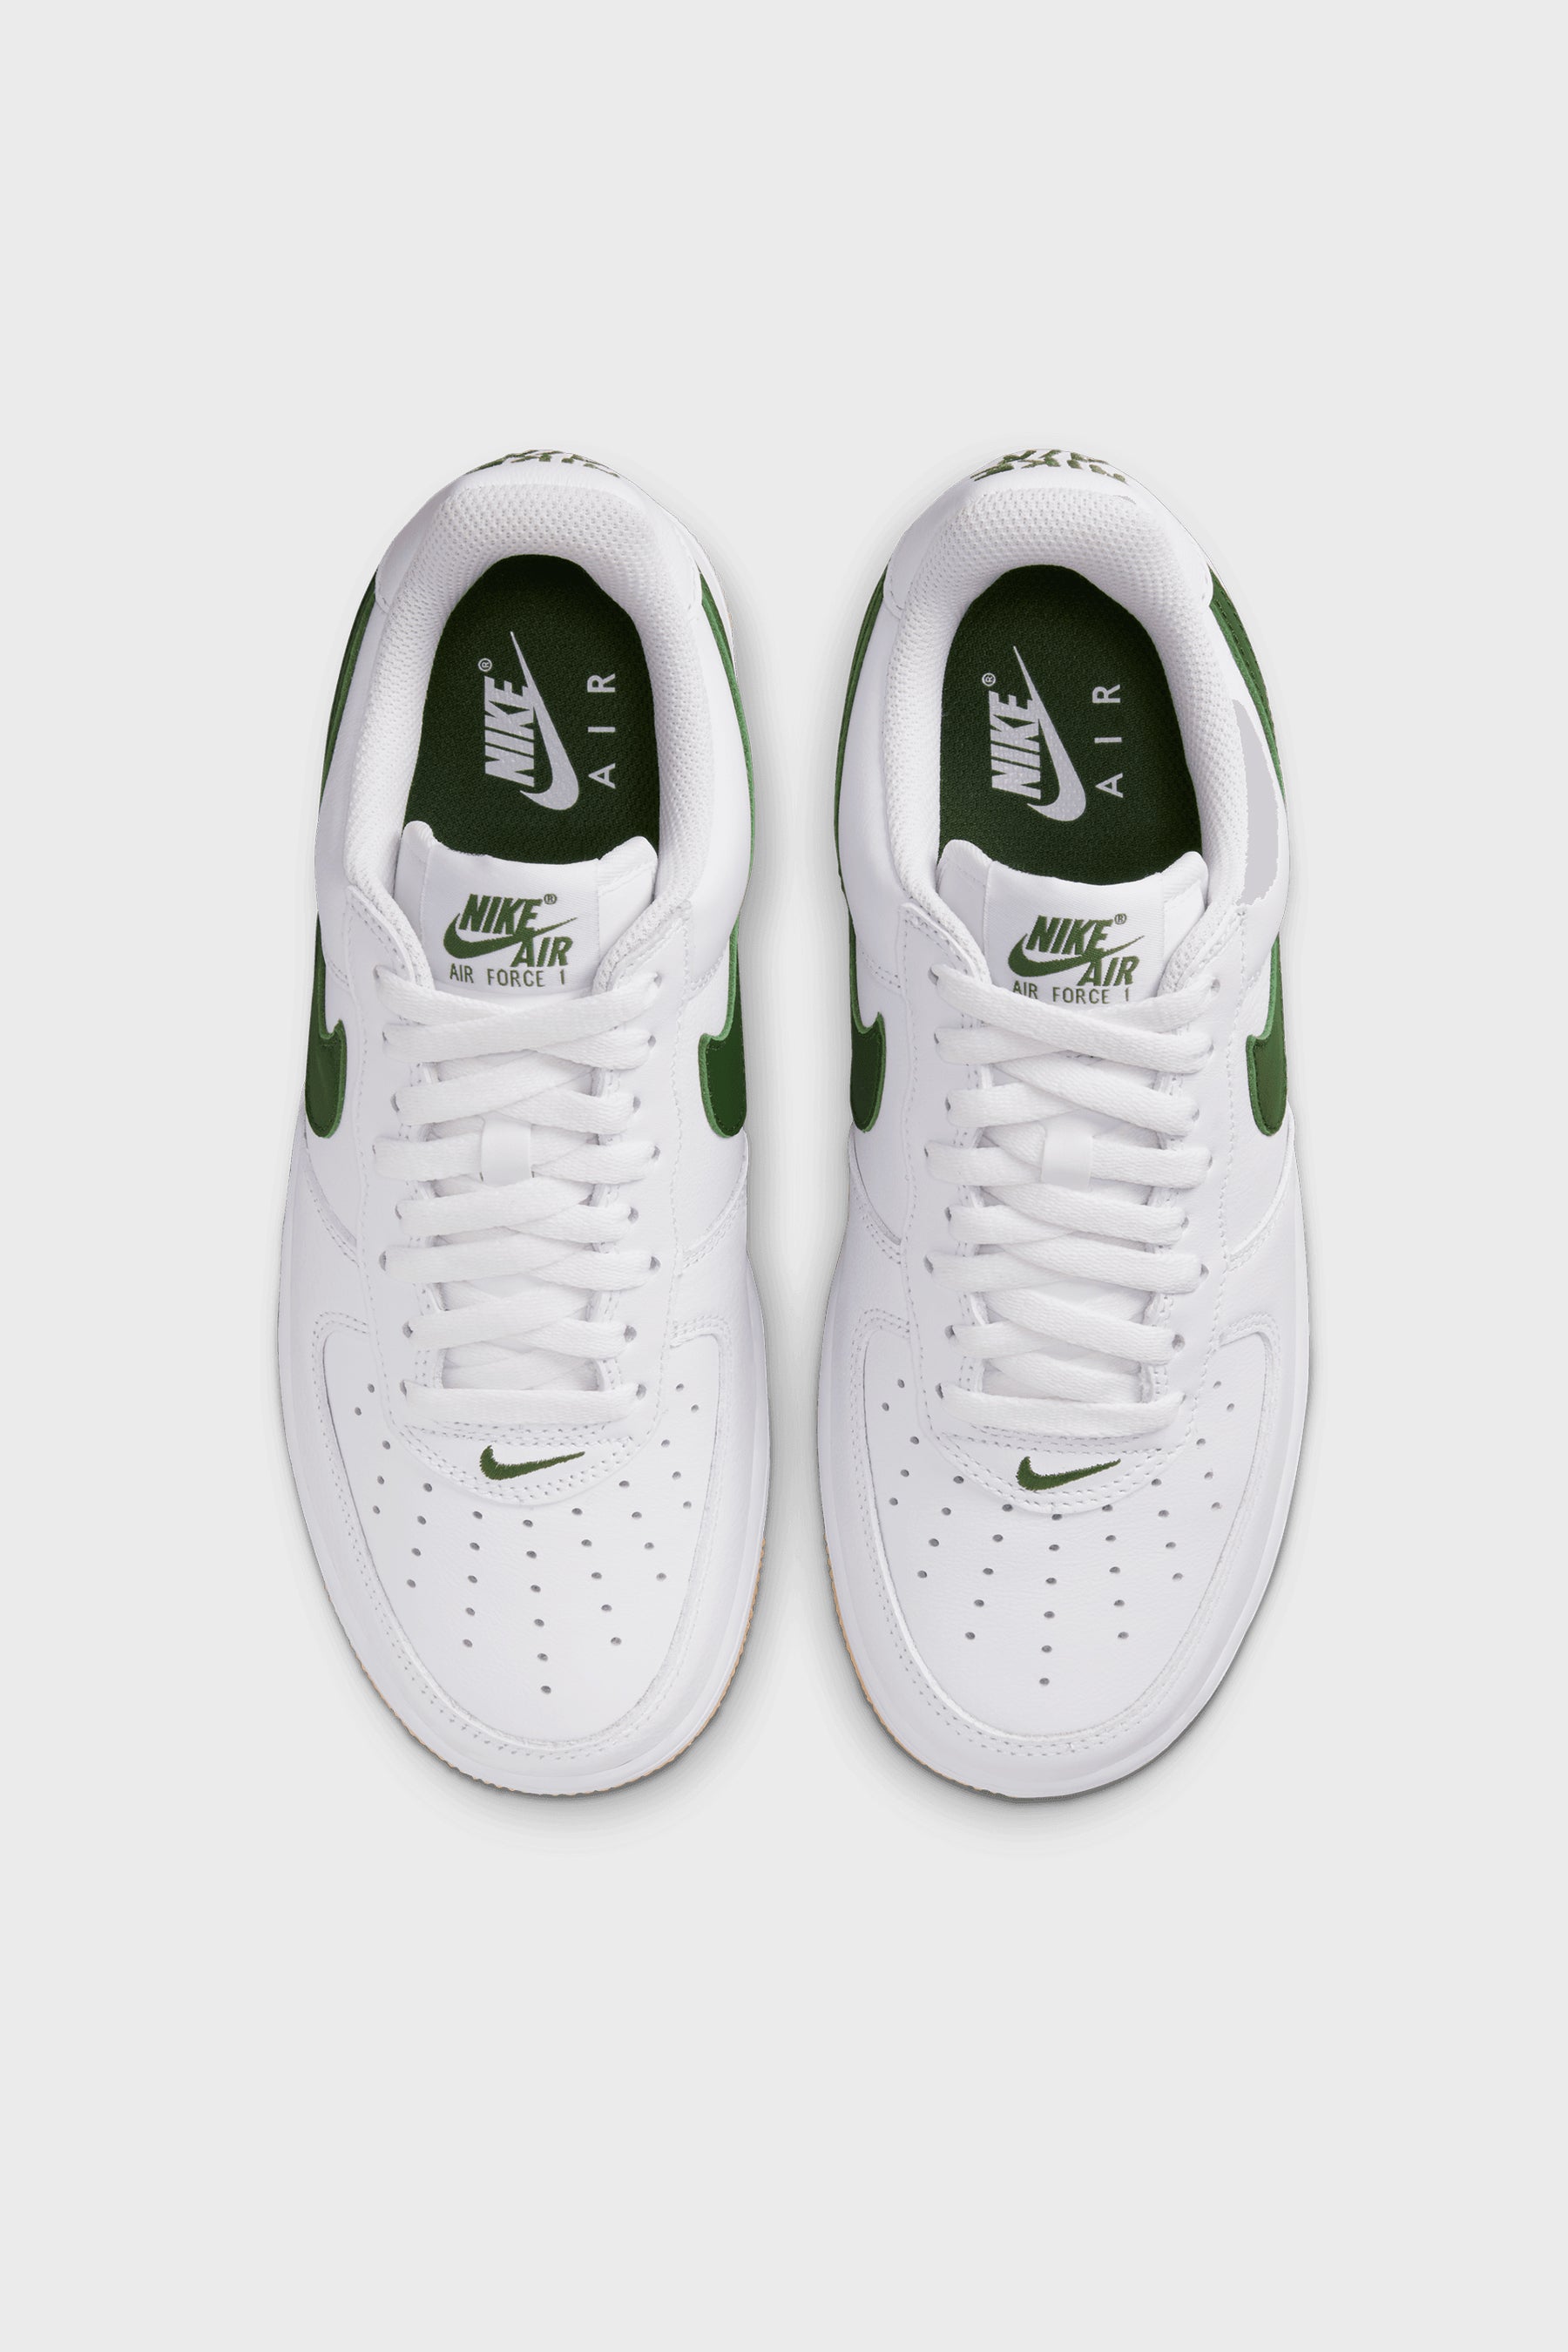 Air Force 1 Low Retro QS White/Forest Green/Gum Yellow FD7039-101